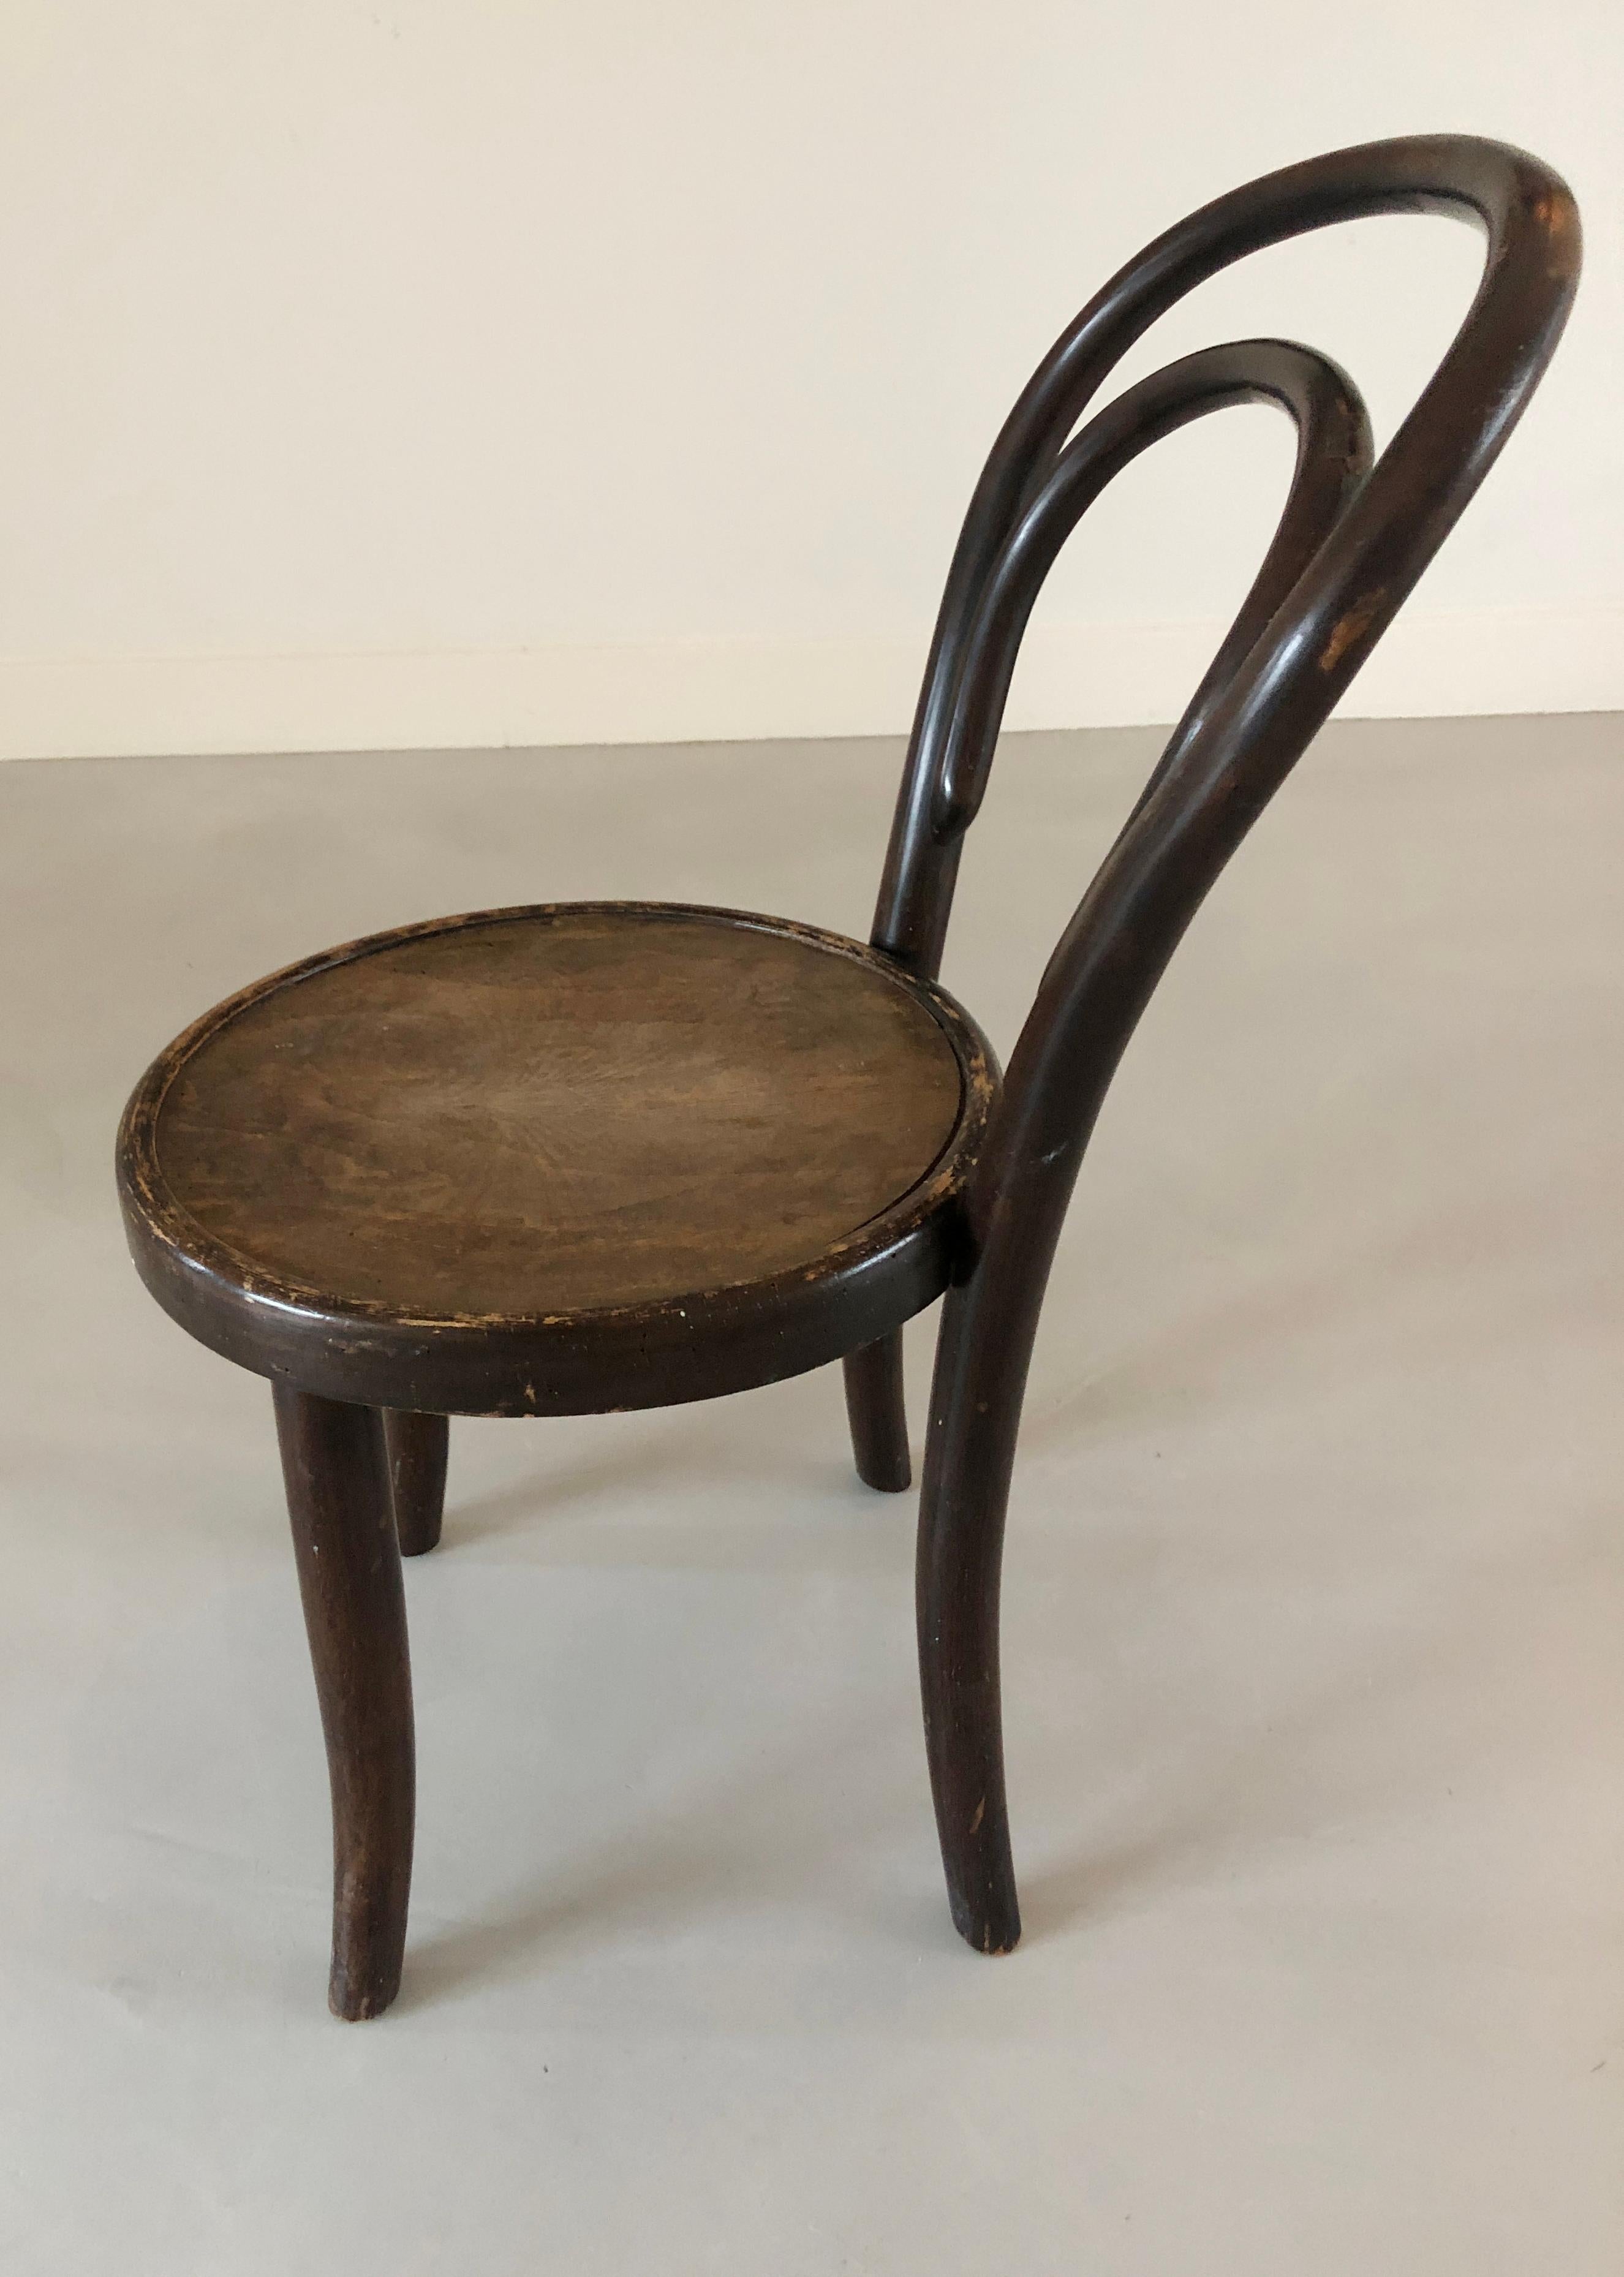 Thonet Child Chair No14 / designed 1859 Vienna / Stamped and labeled / Bentwood 7